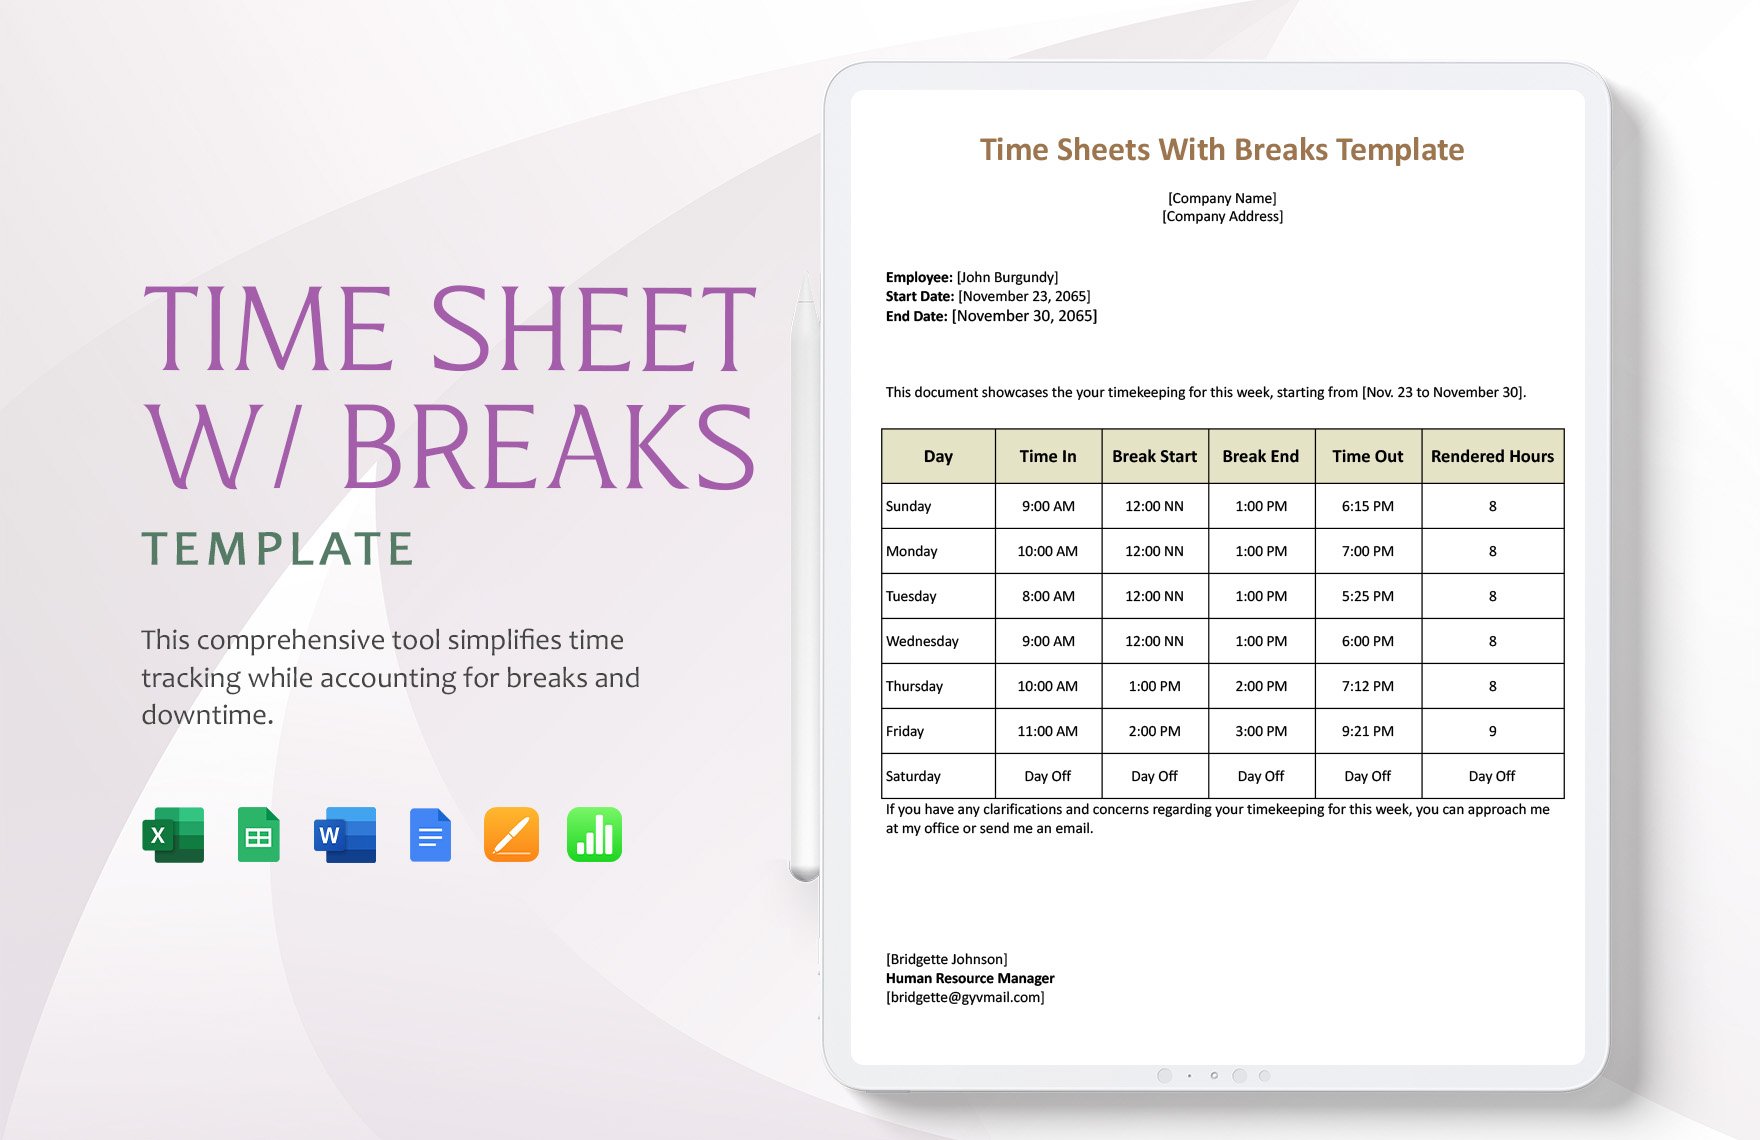 Time Sheet with Breaks Template